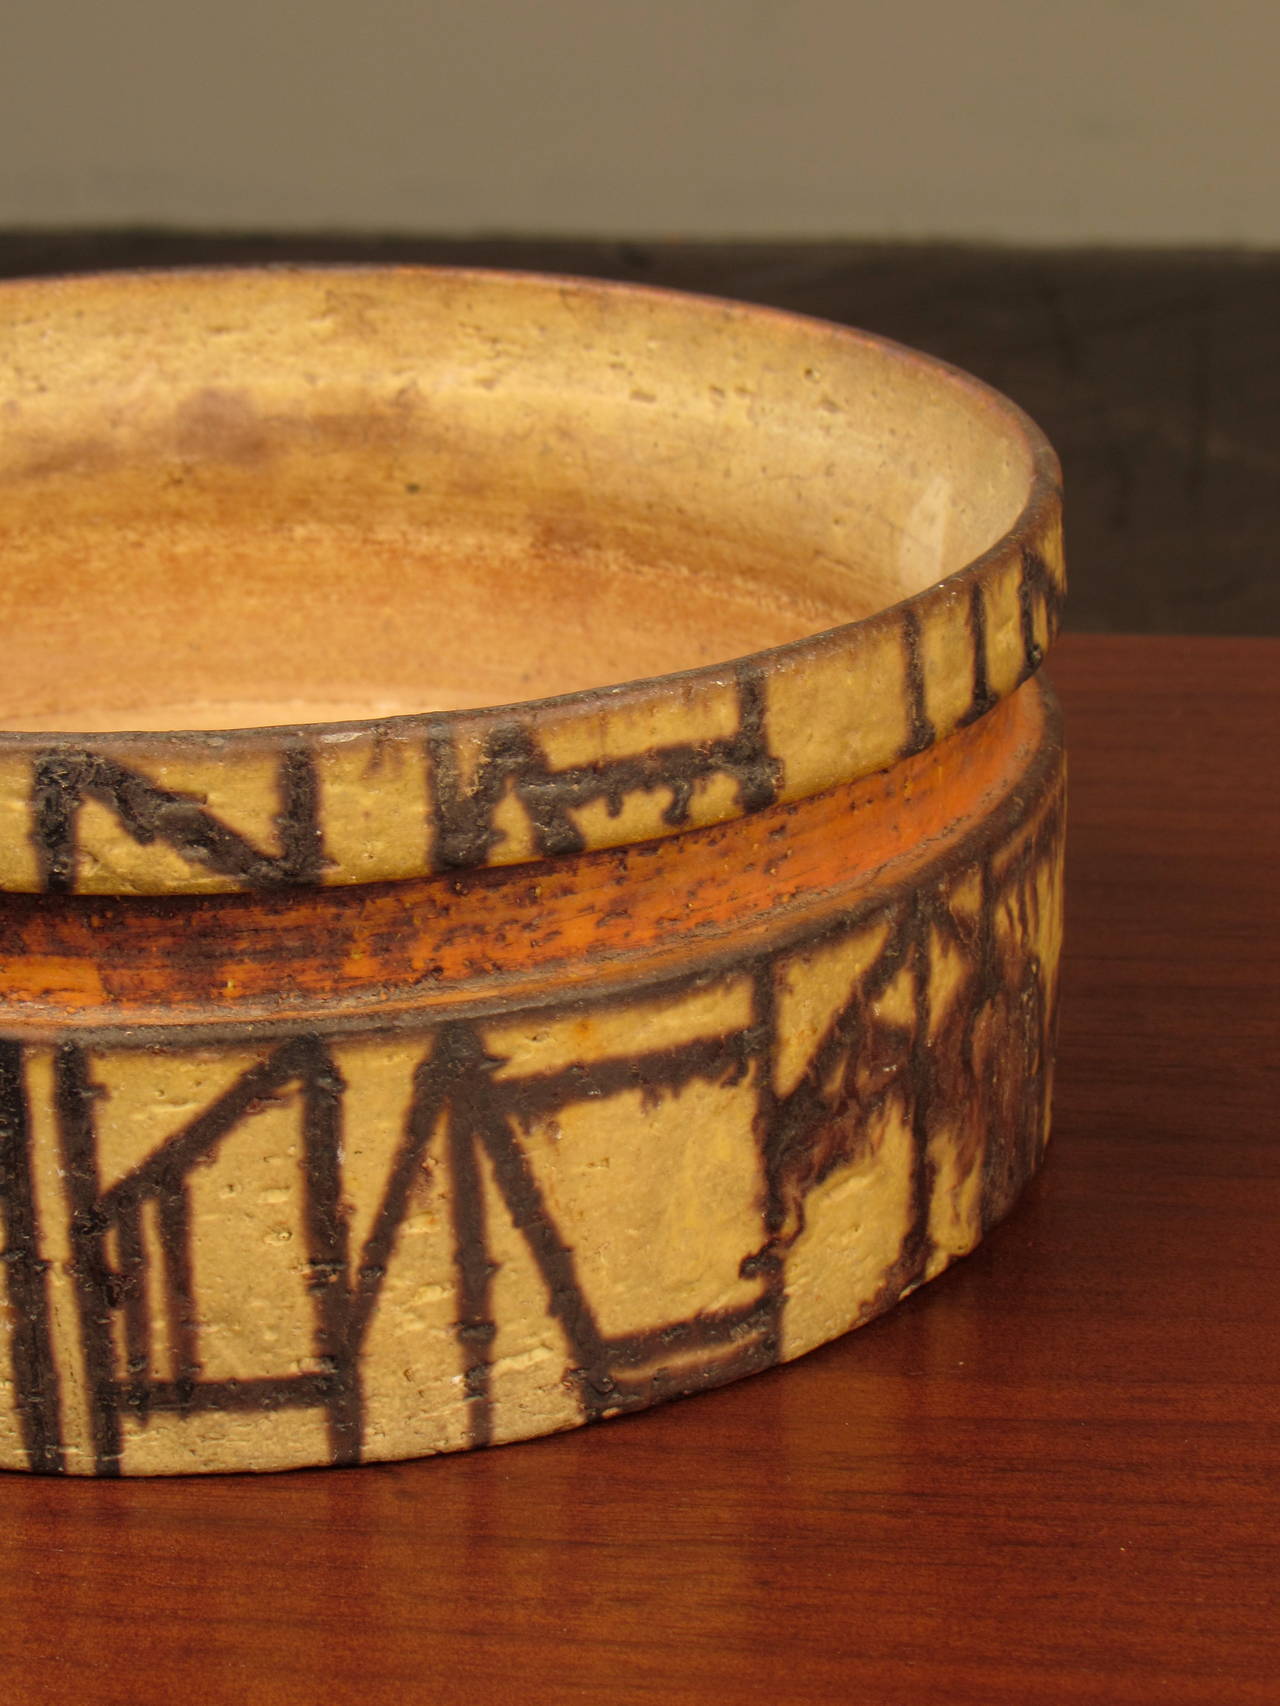 Signed pottery bowl with architectural decoration by Marcello Fantoni, Italy. This piece is in excellent condition with no chips or losses.